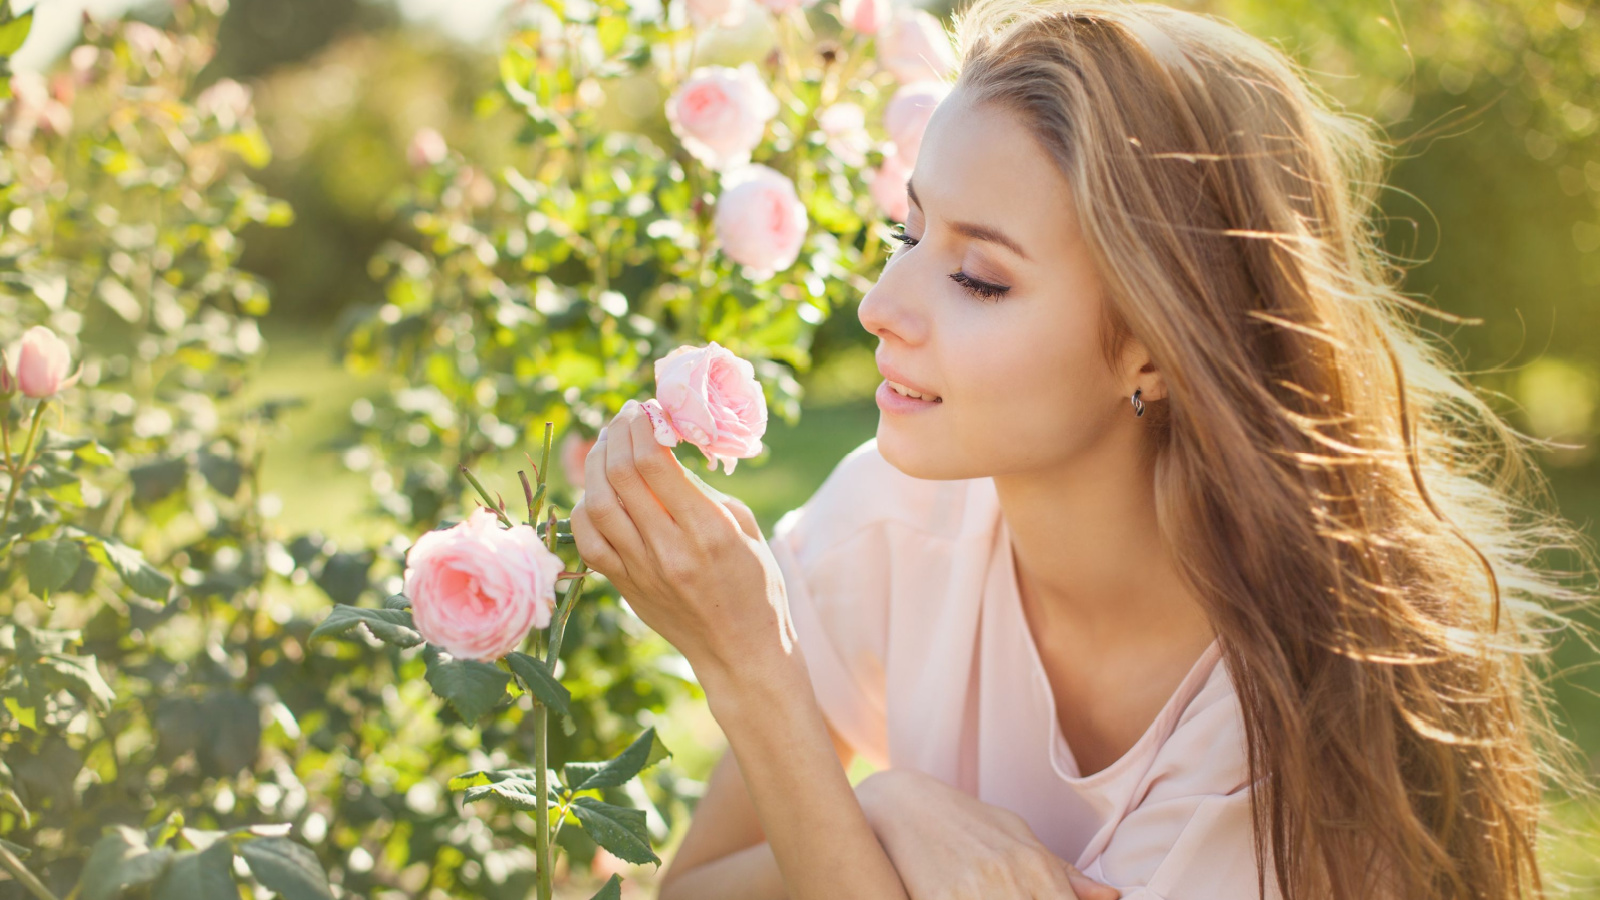 image credit: Mila Supinskaya Glashchenko/Shutterstock <p><span>The tender fragrance of rose gently unfolds within you, like a blossom opening to the morning sun. Each breath draws you closer to the essence of love and compassion in your heart. In this sacred space, your meditation becomes a communion, a tender meeting of your soul with the universal heartbeat. Rose’s delicate aroma reminds you that, in every moment, you are held in the embrace of infinite love.</span></p>